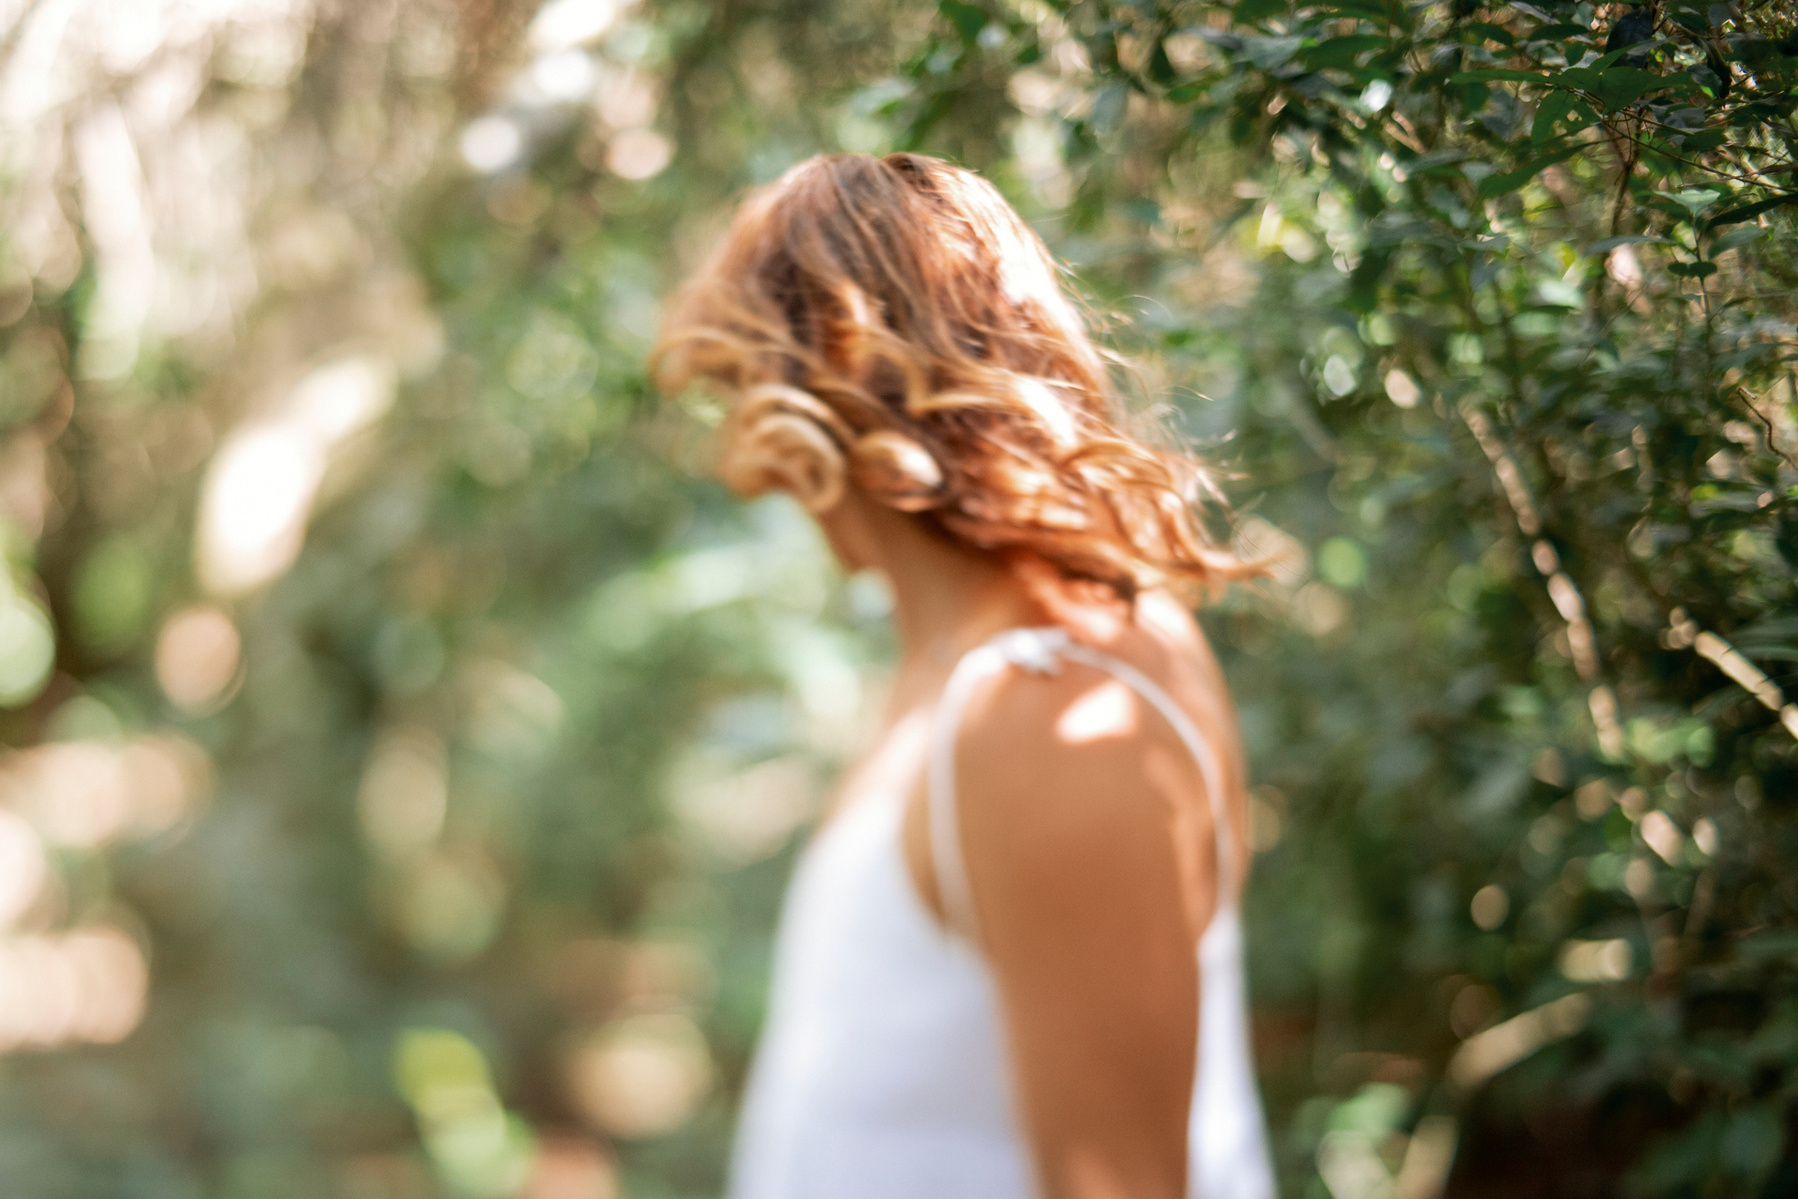 A slim woman with curled hair wears a white tank top, she stand in greenery and has dappled sunlight all around her